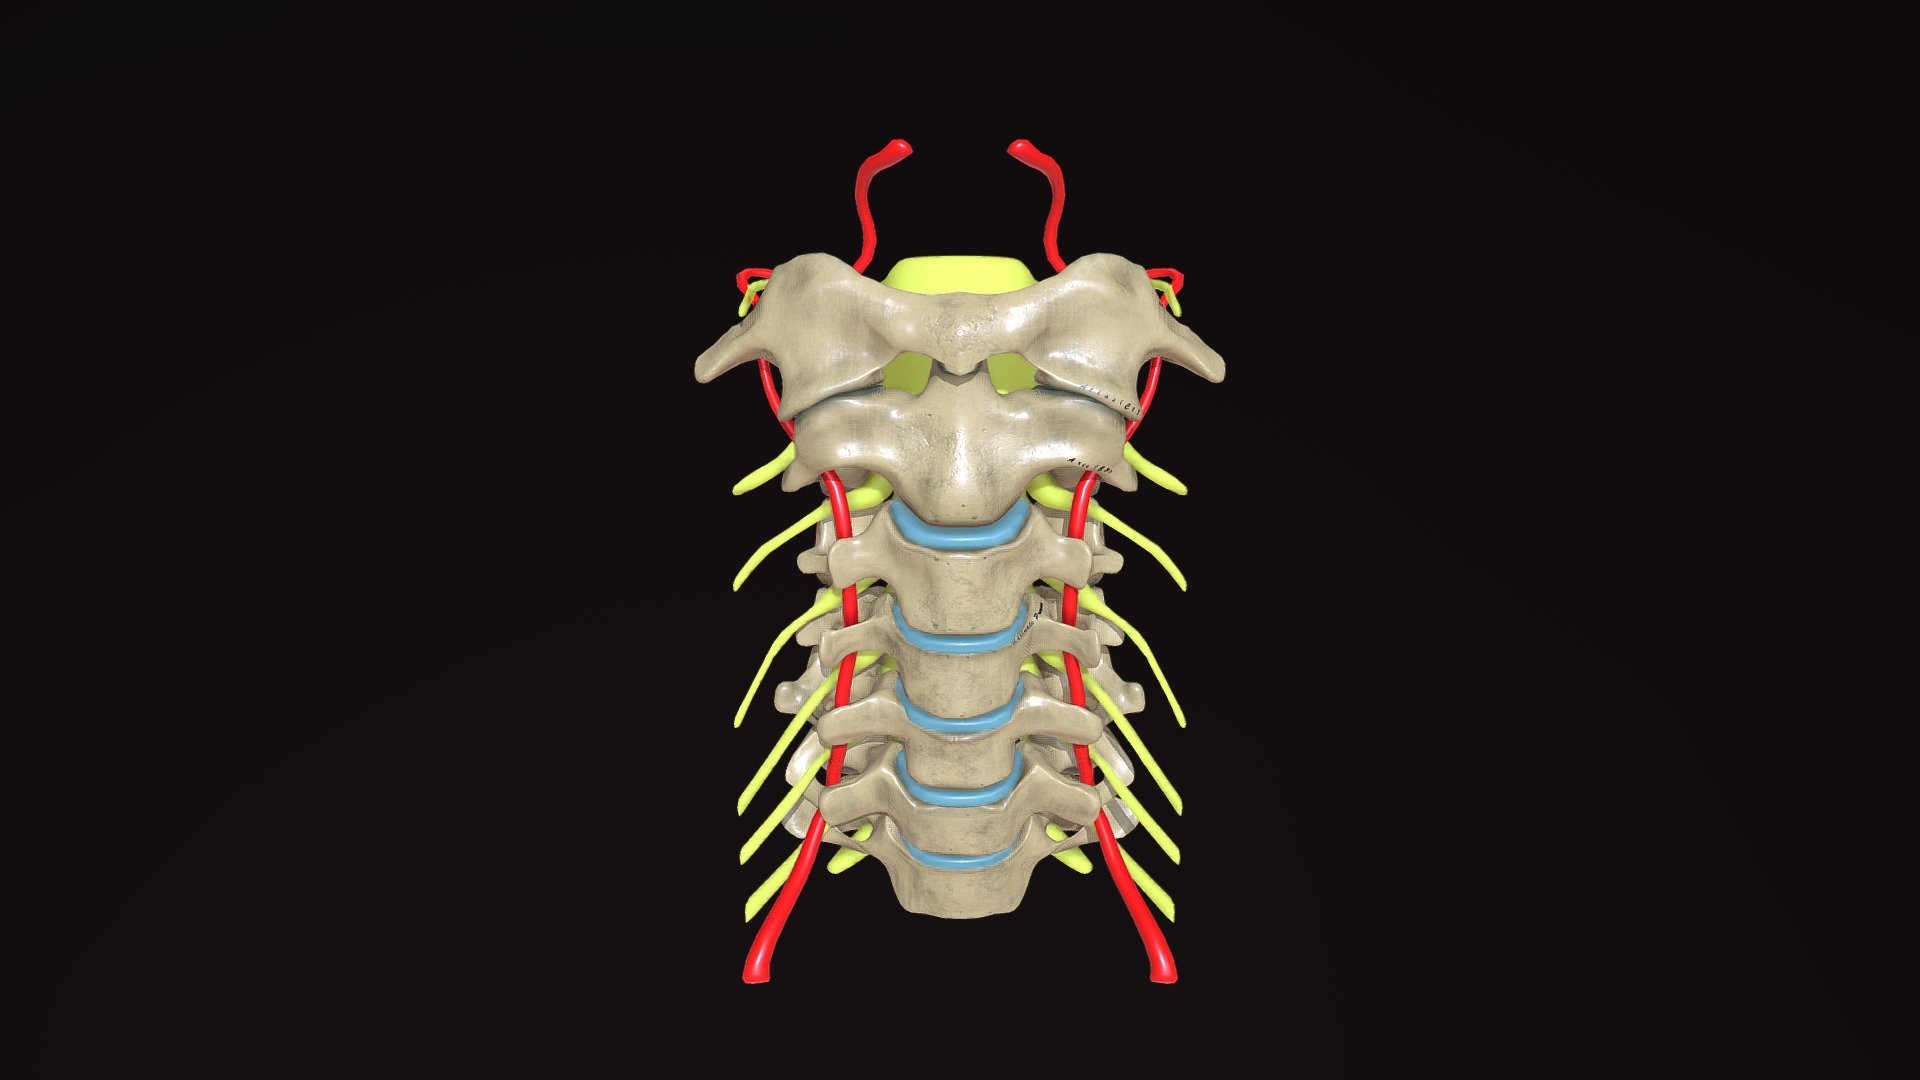 Cervical Vertebrae(C1-C7) illustrated along with spinal nerves and the vertebral arteries in the transverse foramena.

Uncinate process is labelled. Outgrowth from uncinate process(like osteophytes) can result in compression of the spinal nerve and/or vertebral arteries leading to chronic pain in the neck 3d model